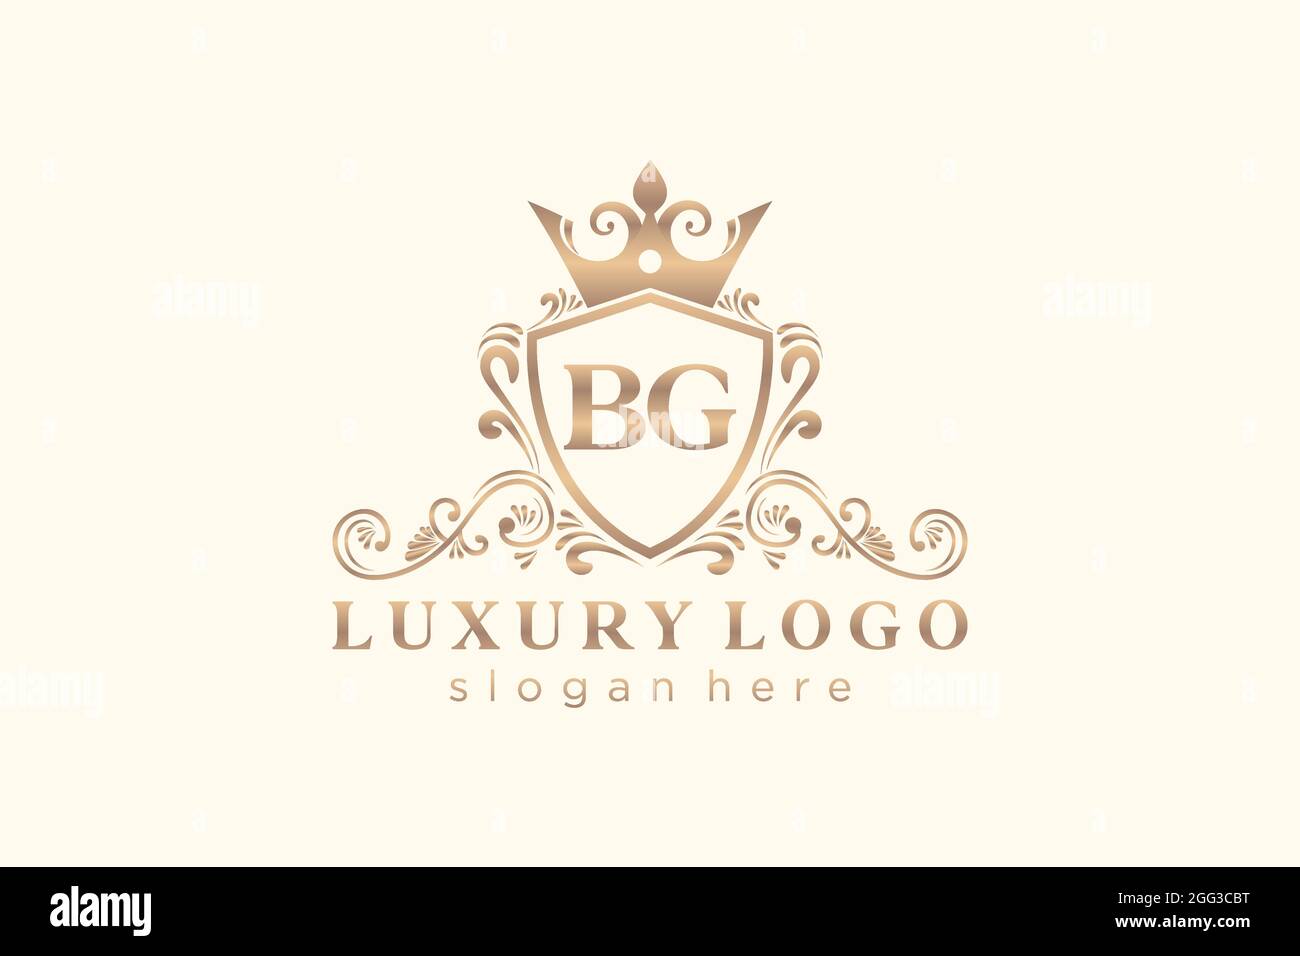 BG Letter Royal Luxury Logo template in vector art for Restaurant, Royalty, Boutique, Cafe, Hotel, Heraldic, Jewelry, Fashion and other vector illustr Stock Vector